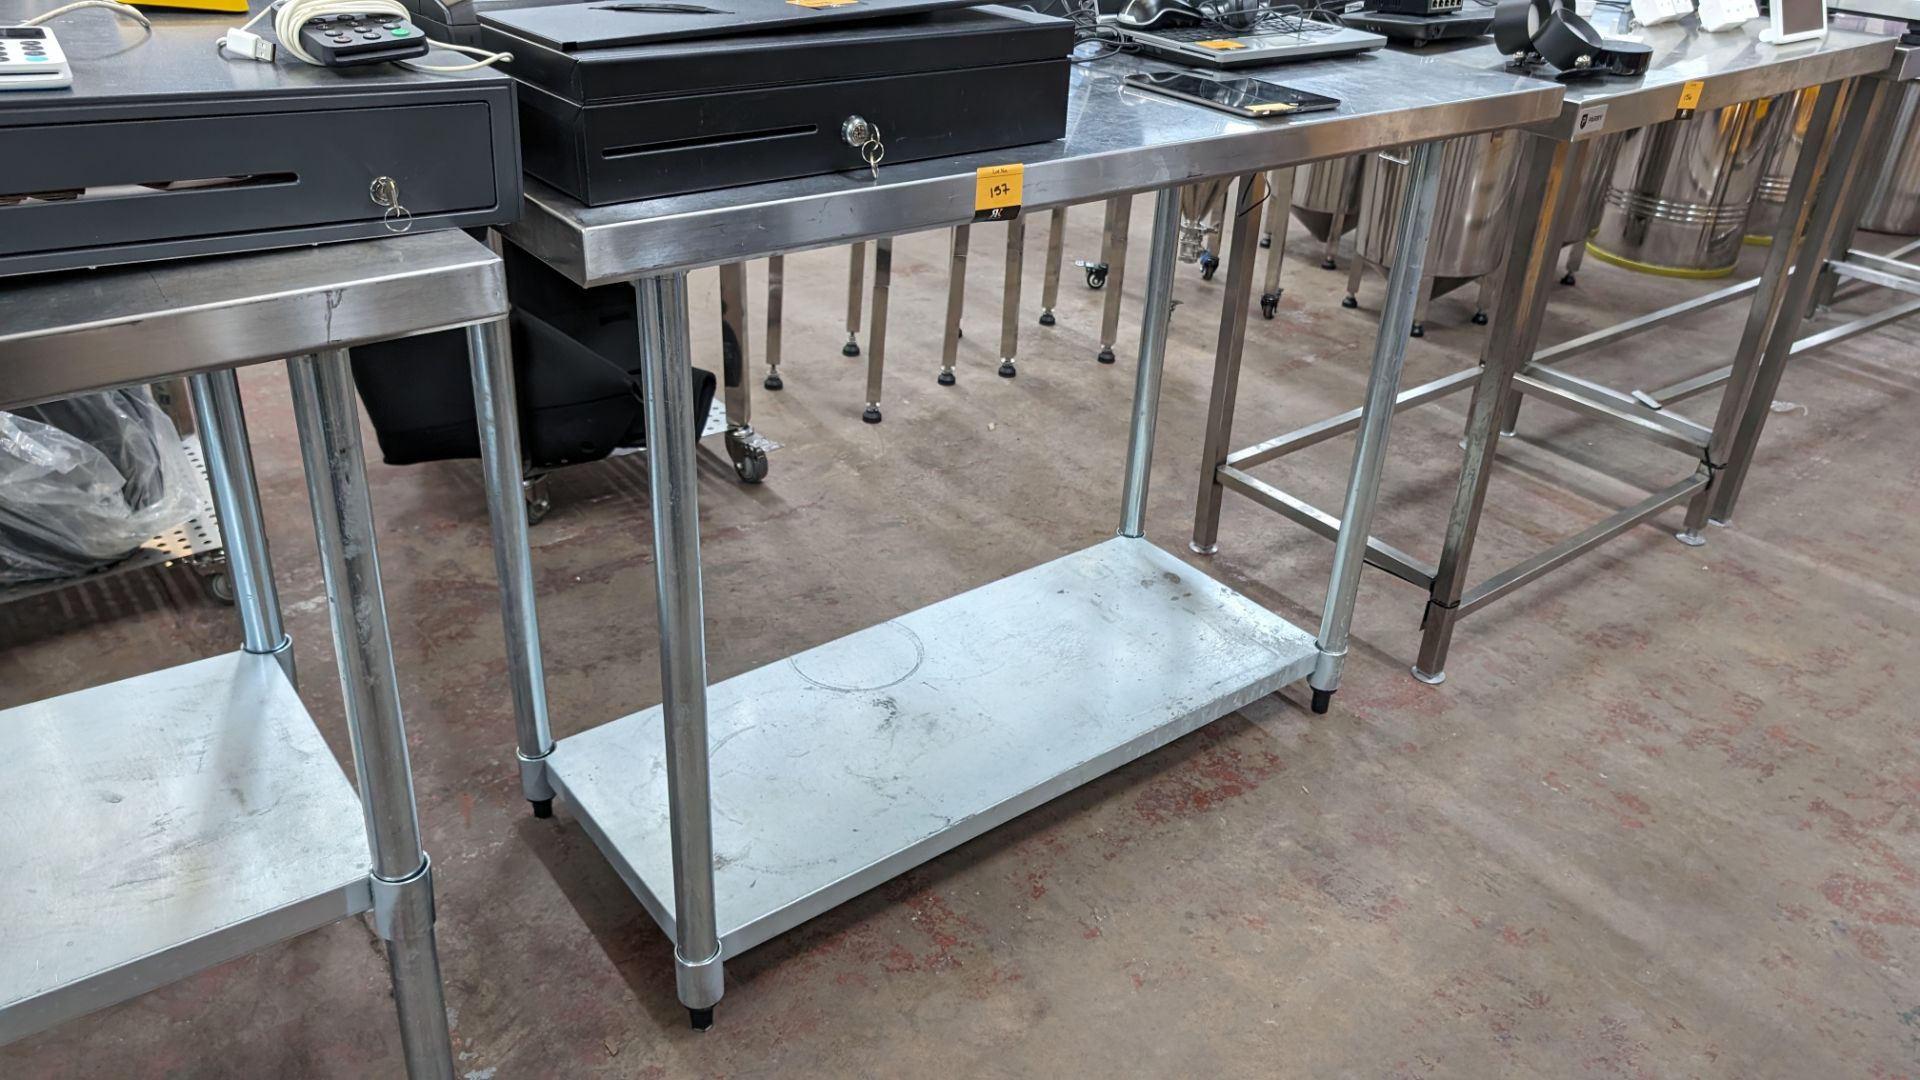 Stainless steel twin tier table with upstand at rear, max dimensions: 940mm x 610mm x 1220mm - Image 4 of 4